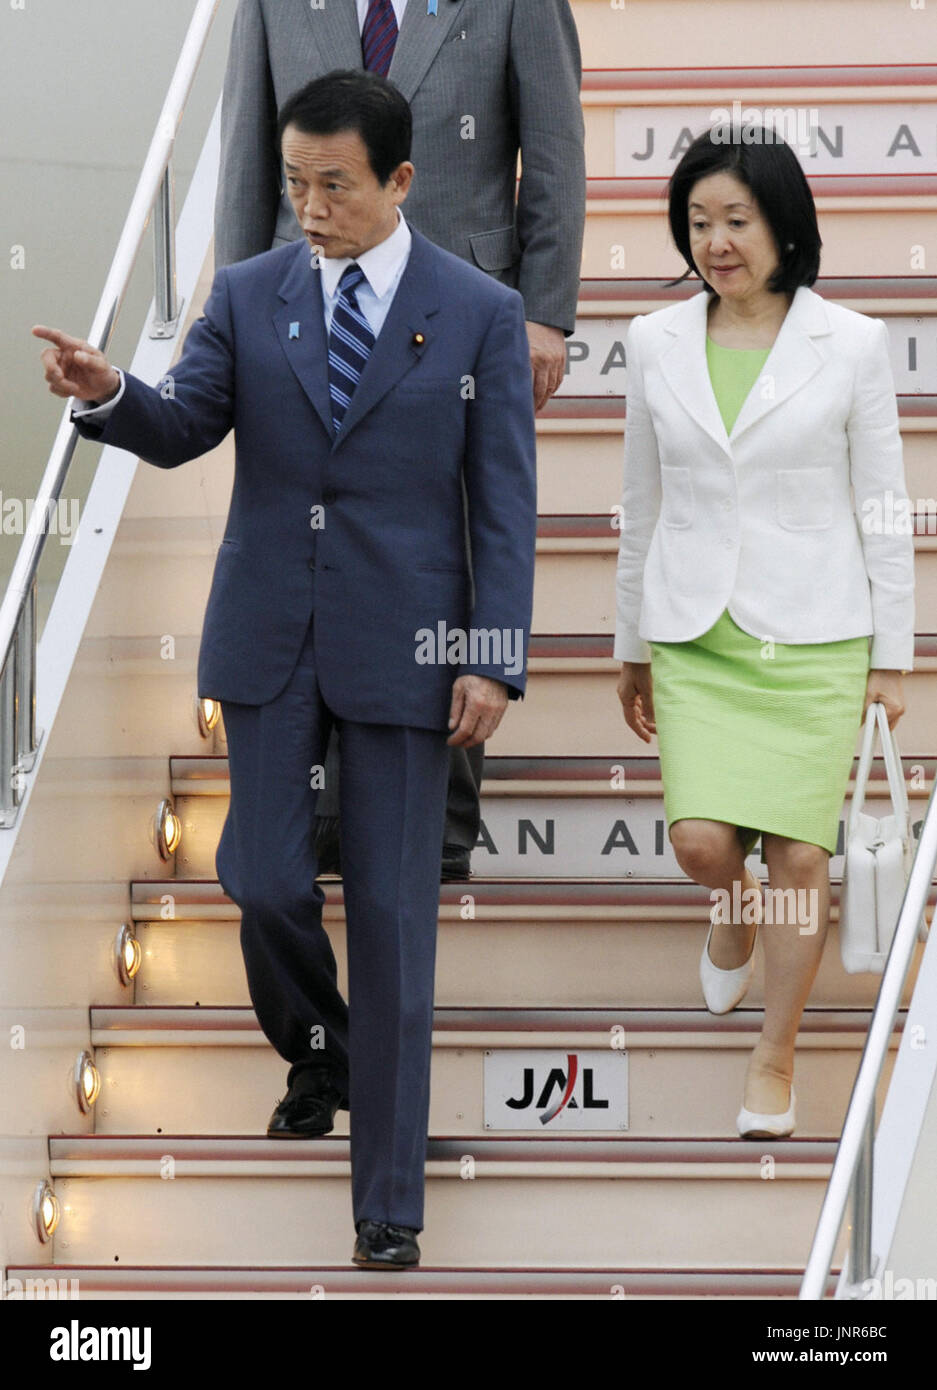 TOKYO, Japan - Japanese Prime Minister Taro Aso, accompanied by his wife Chikako, returns home at Tokyo's Haneda airport on July 11 from the summit of the Group of Eight major powers in Italy. (Kyodo) Stock Photo